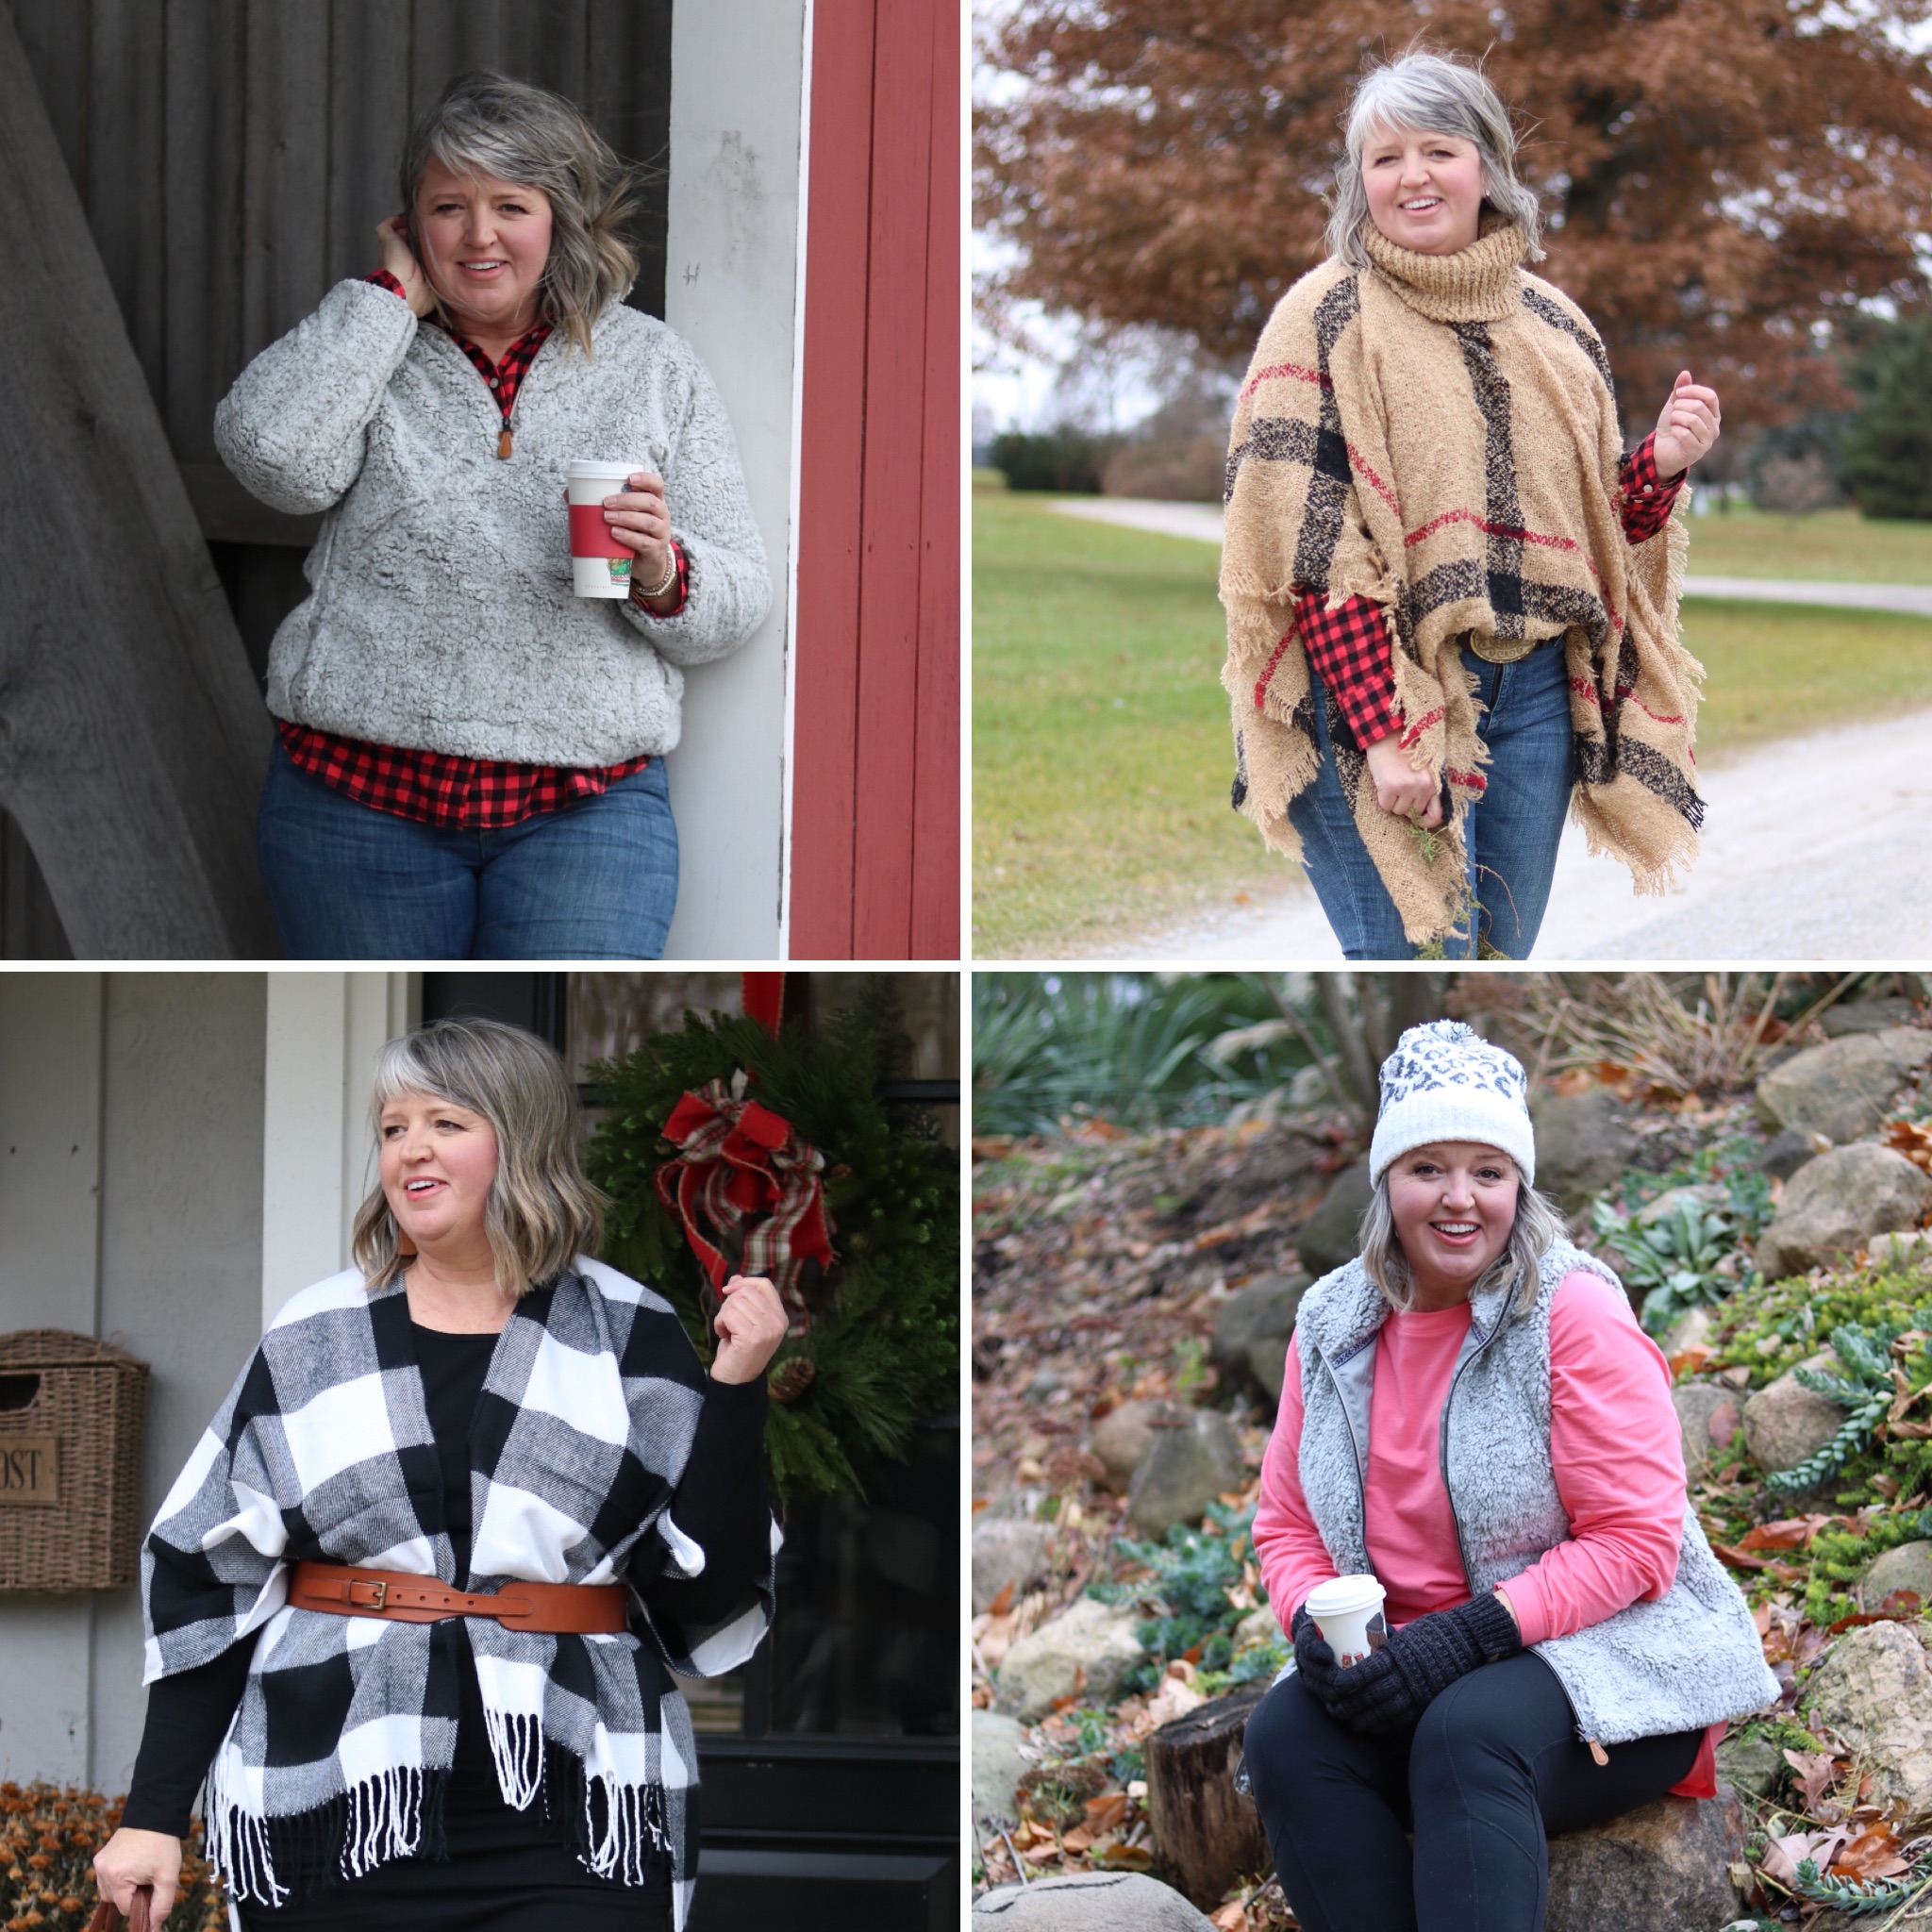 How to style full-figured fashion || 4-Styling tips for plus-size fashion || #plussizefashiontips #fashionforover50women #over50andfullfigured #plussizeandover50